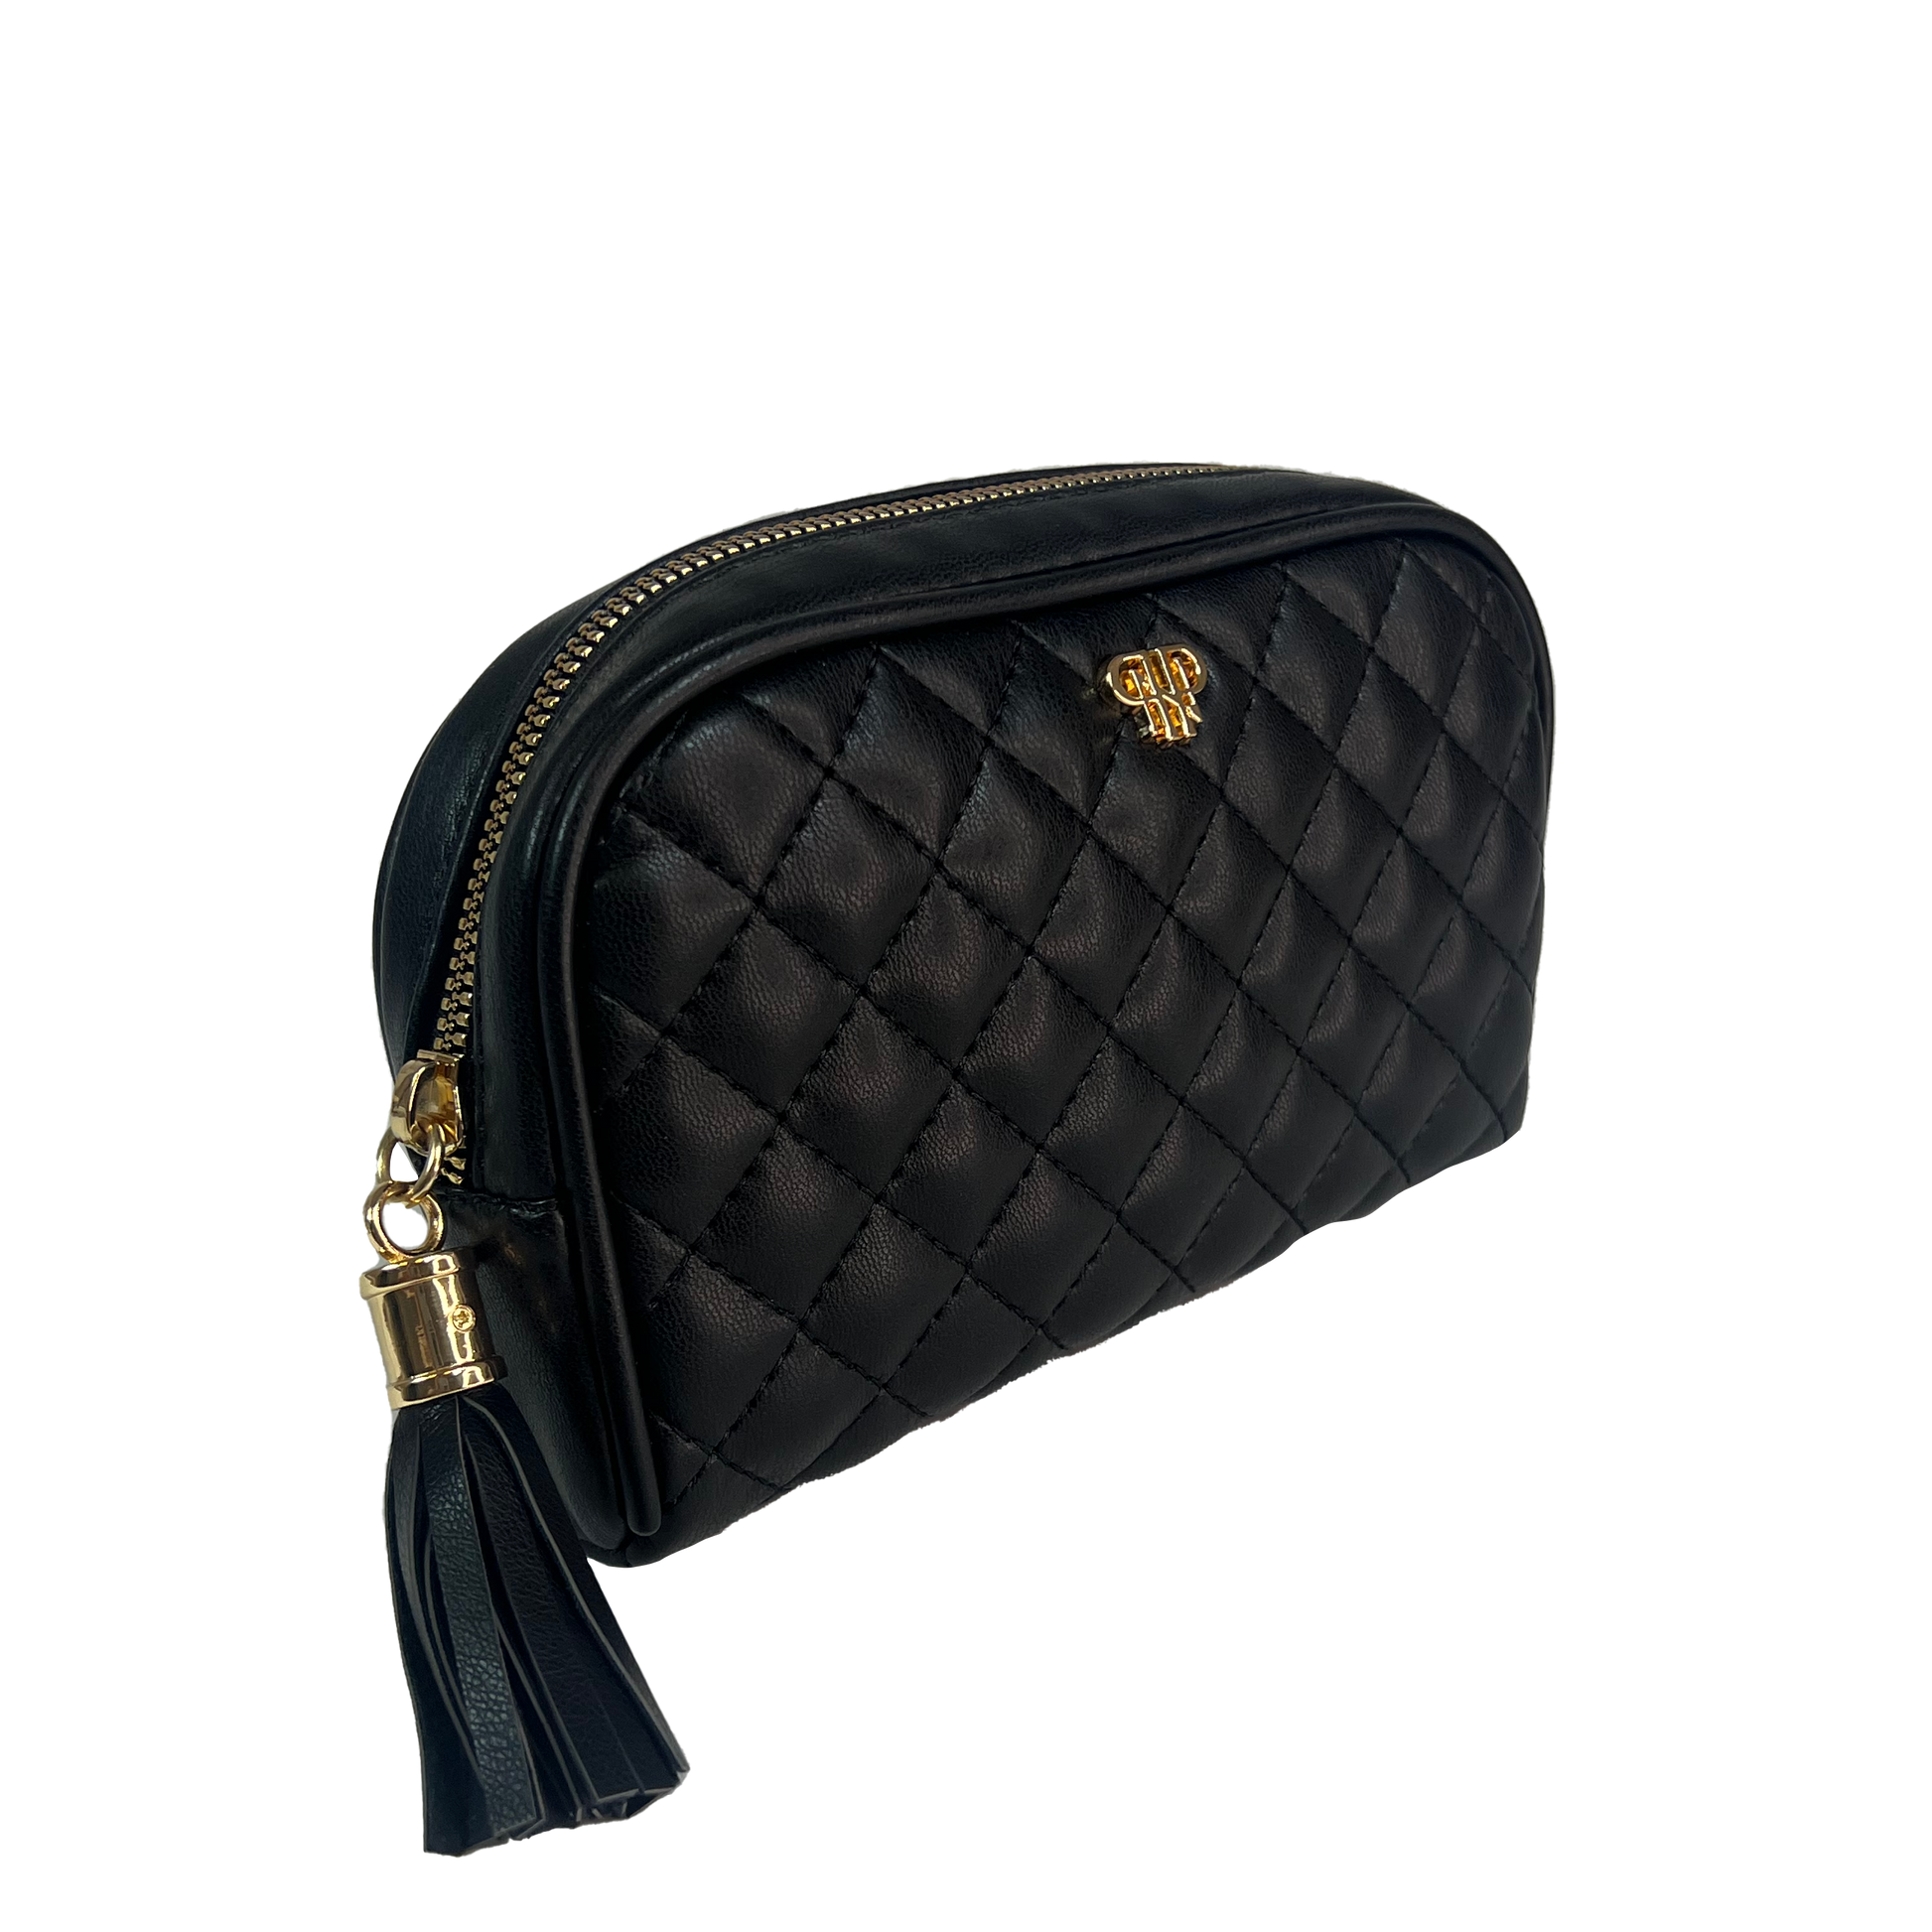 Pursen Classic Small Makeup Bag - Black Quilted Vegan Leather